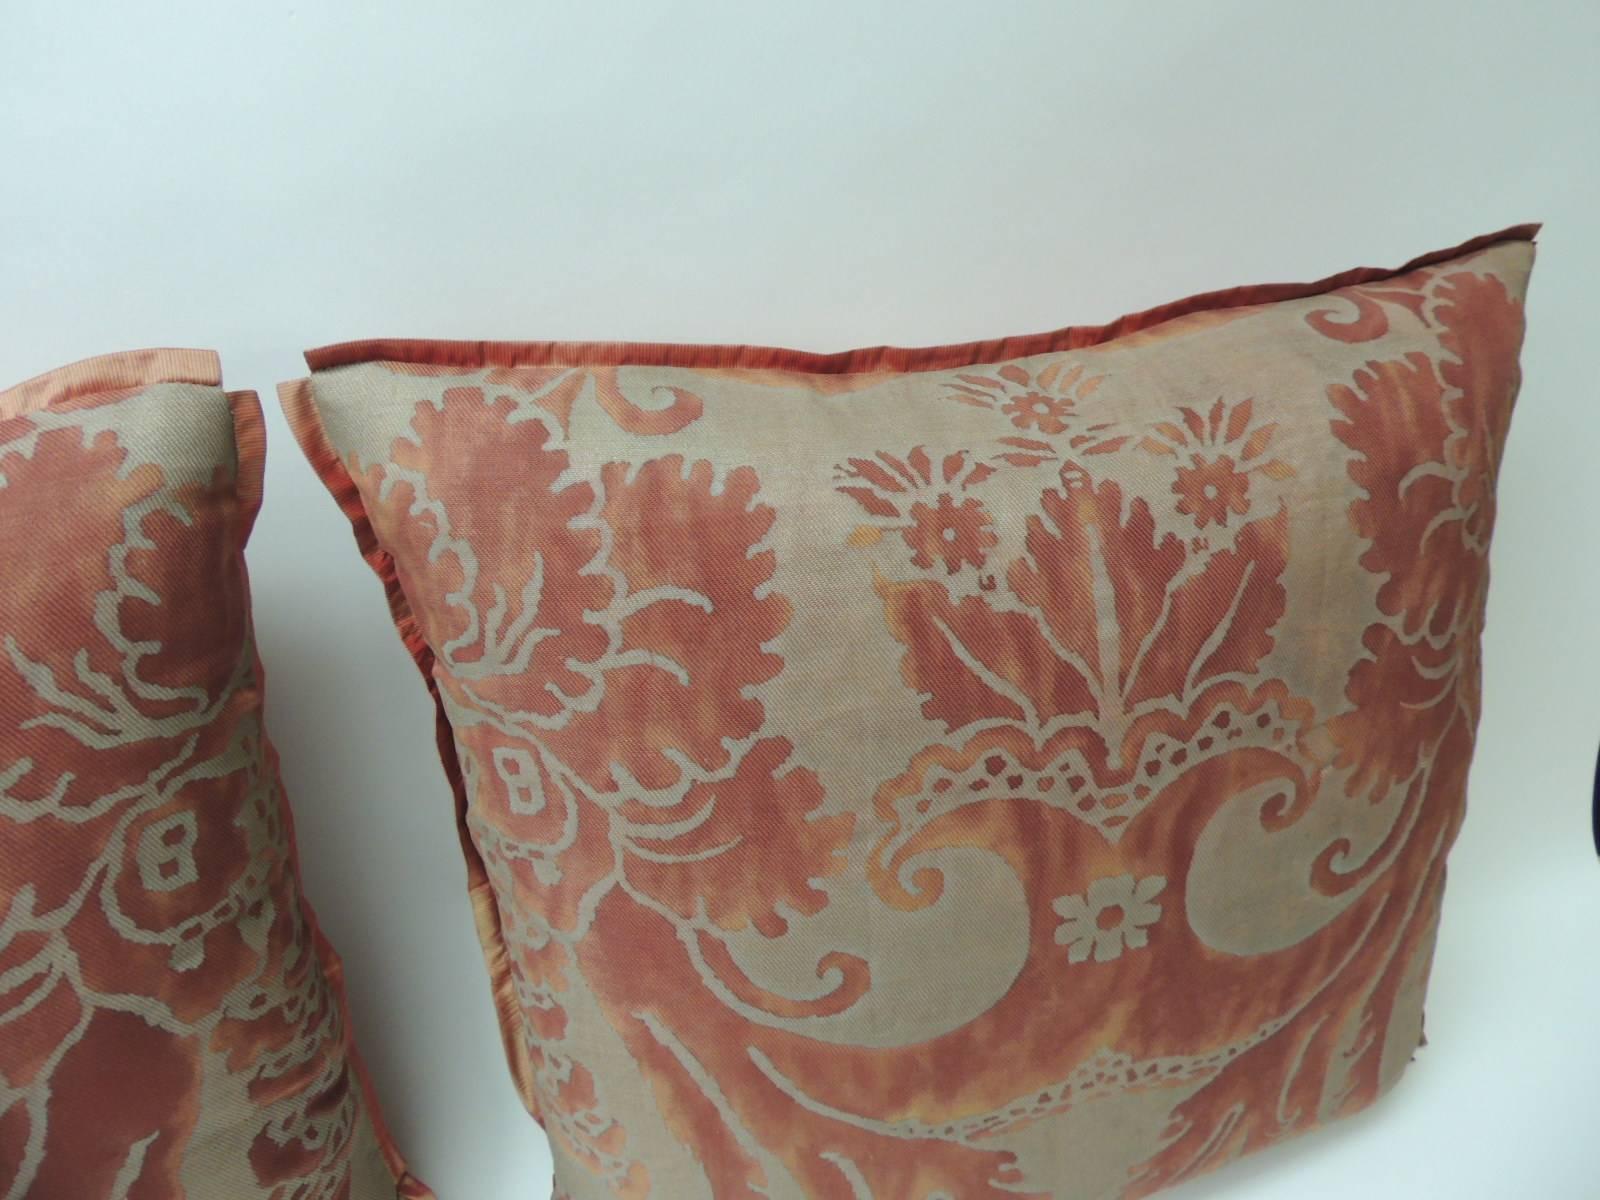 Pair of Vintage fortuny “Glicine” pattern red and silvery decorative square pillows. Accentuated with ATG custom flat trim all around. Sames silk as the backings.
Decorative pillows handcrafted and designed in the USA. Closure by stitch (no zipper)